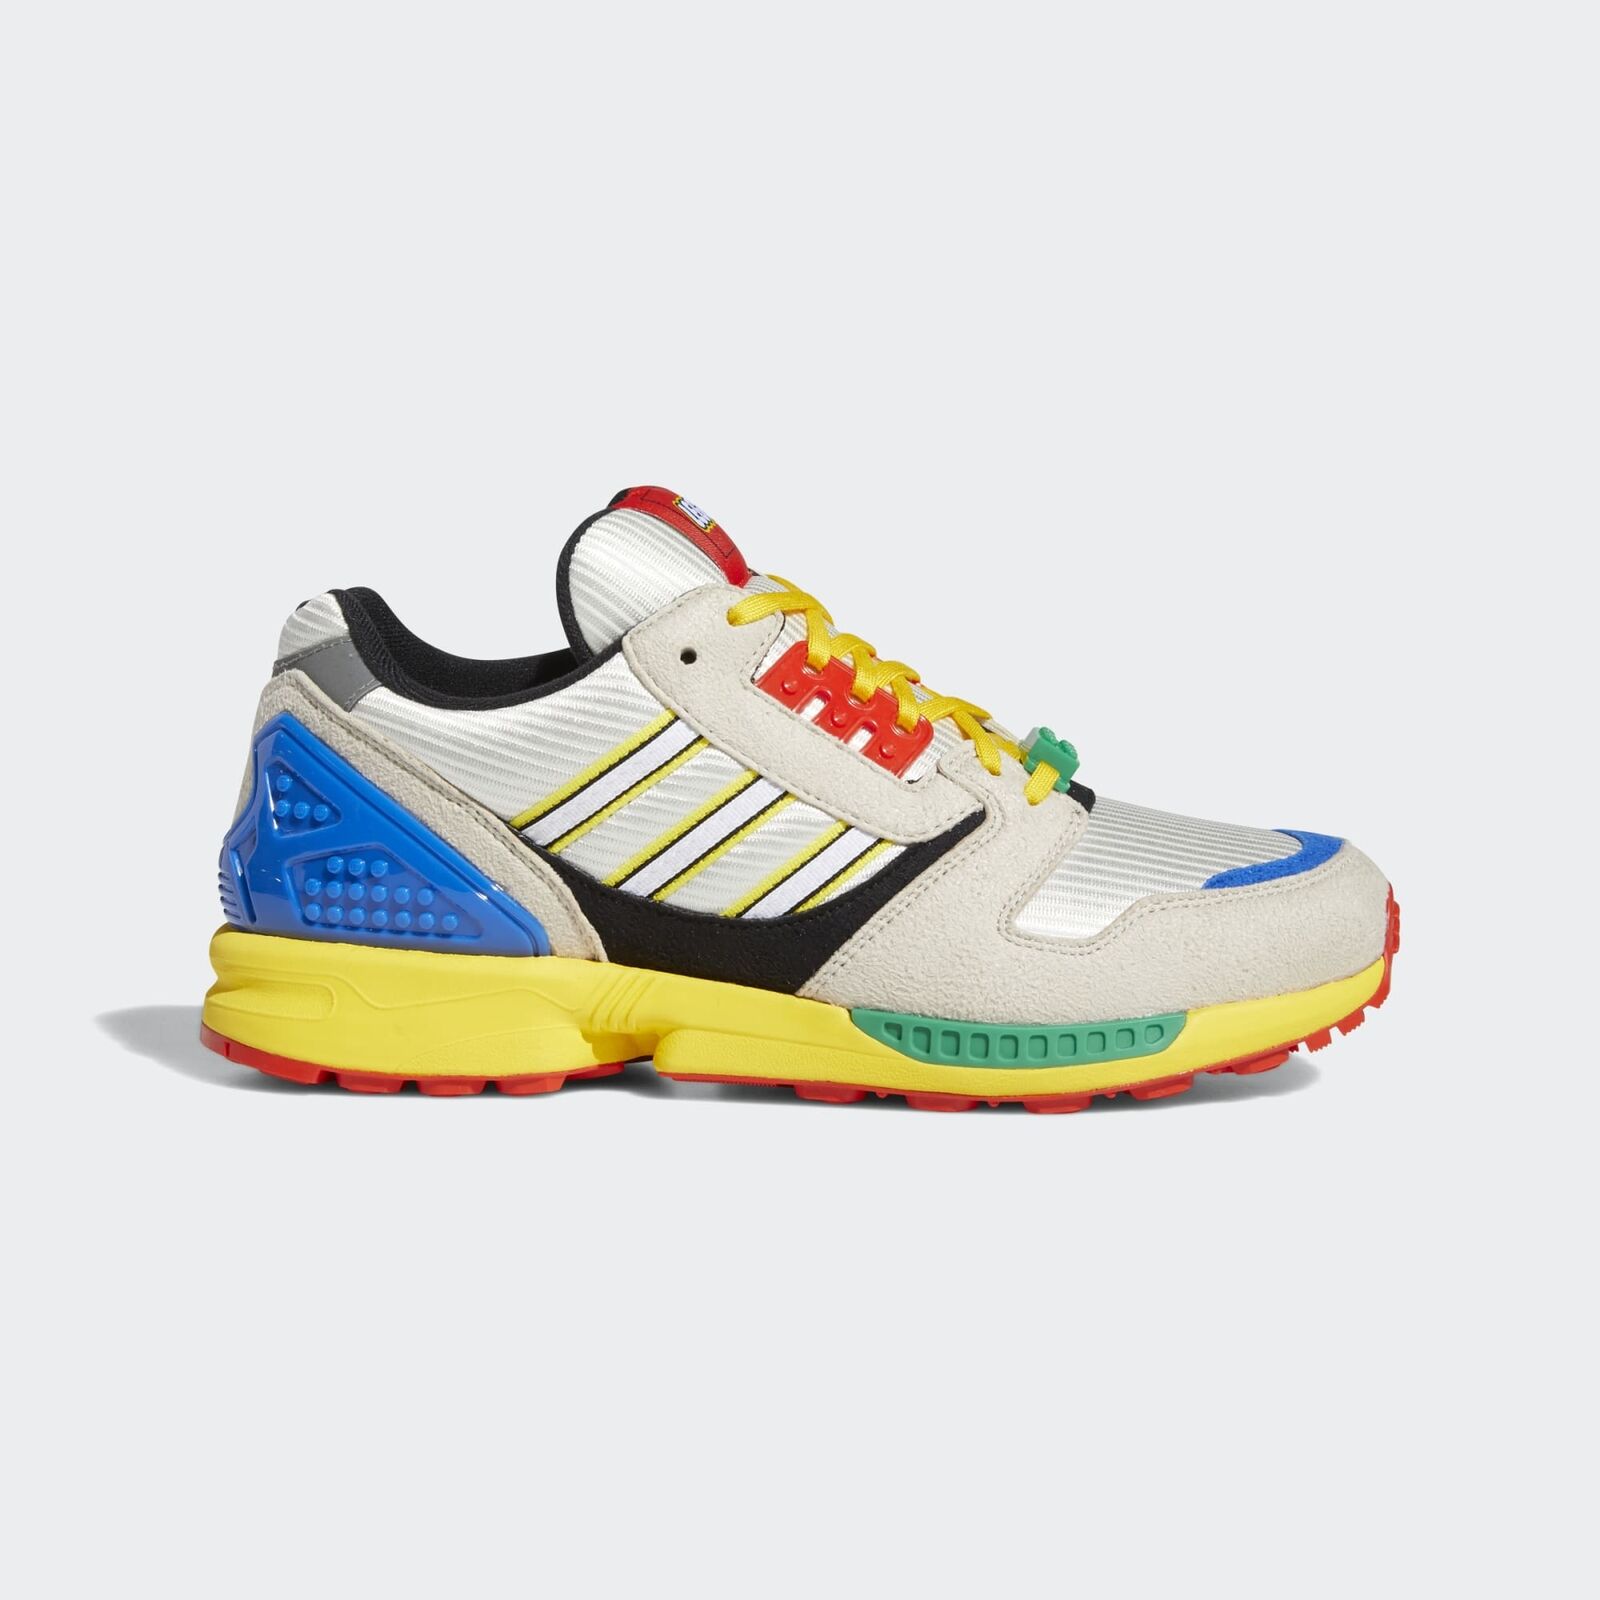 Adidas ZX 8000 LEGO Limited Edition Shoes Men's Size 6-14 FZ3482